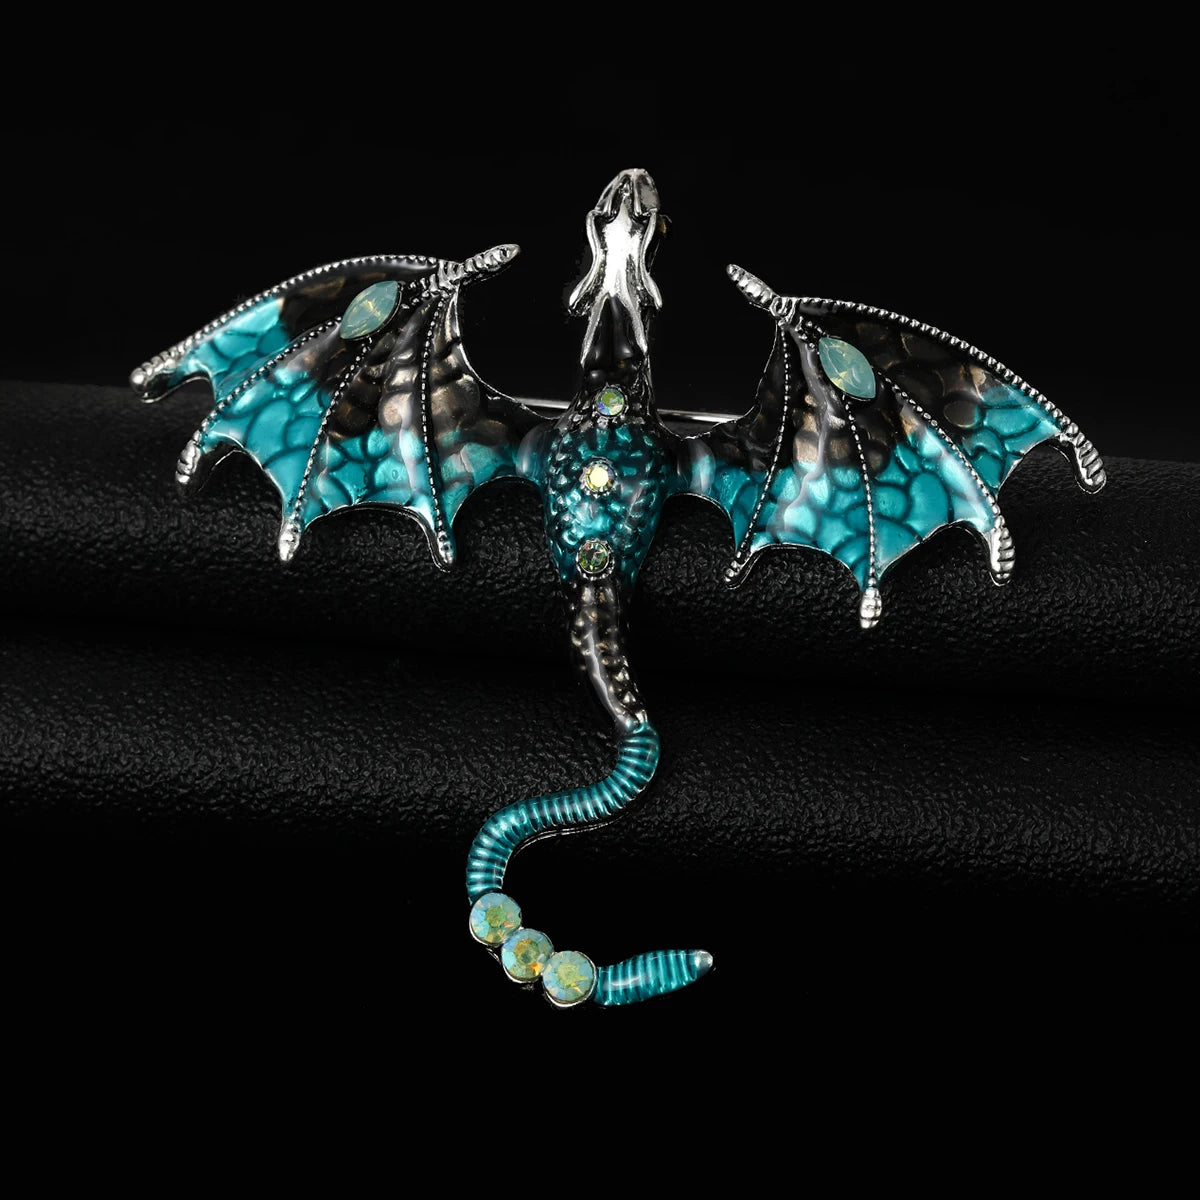 Enamel Dragon Brooches - Mythical Pieces Black